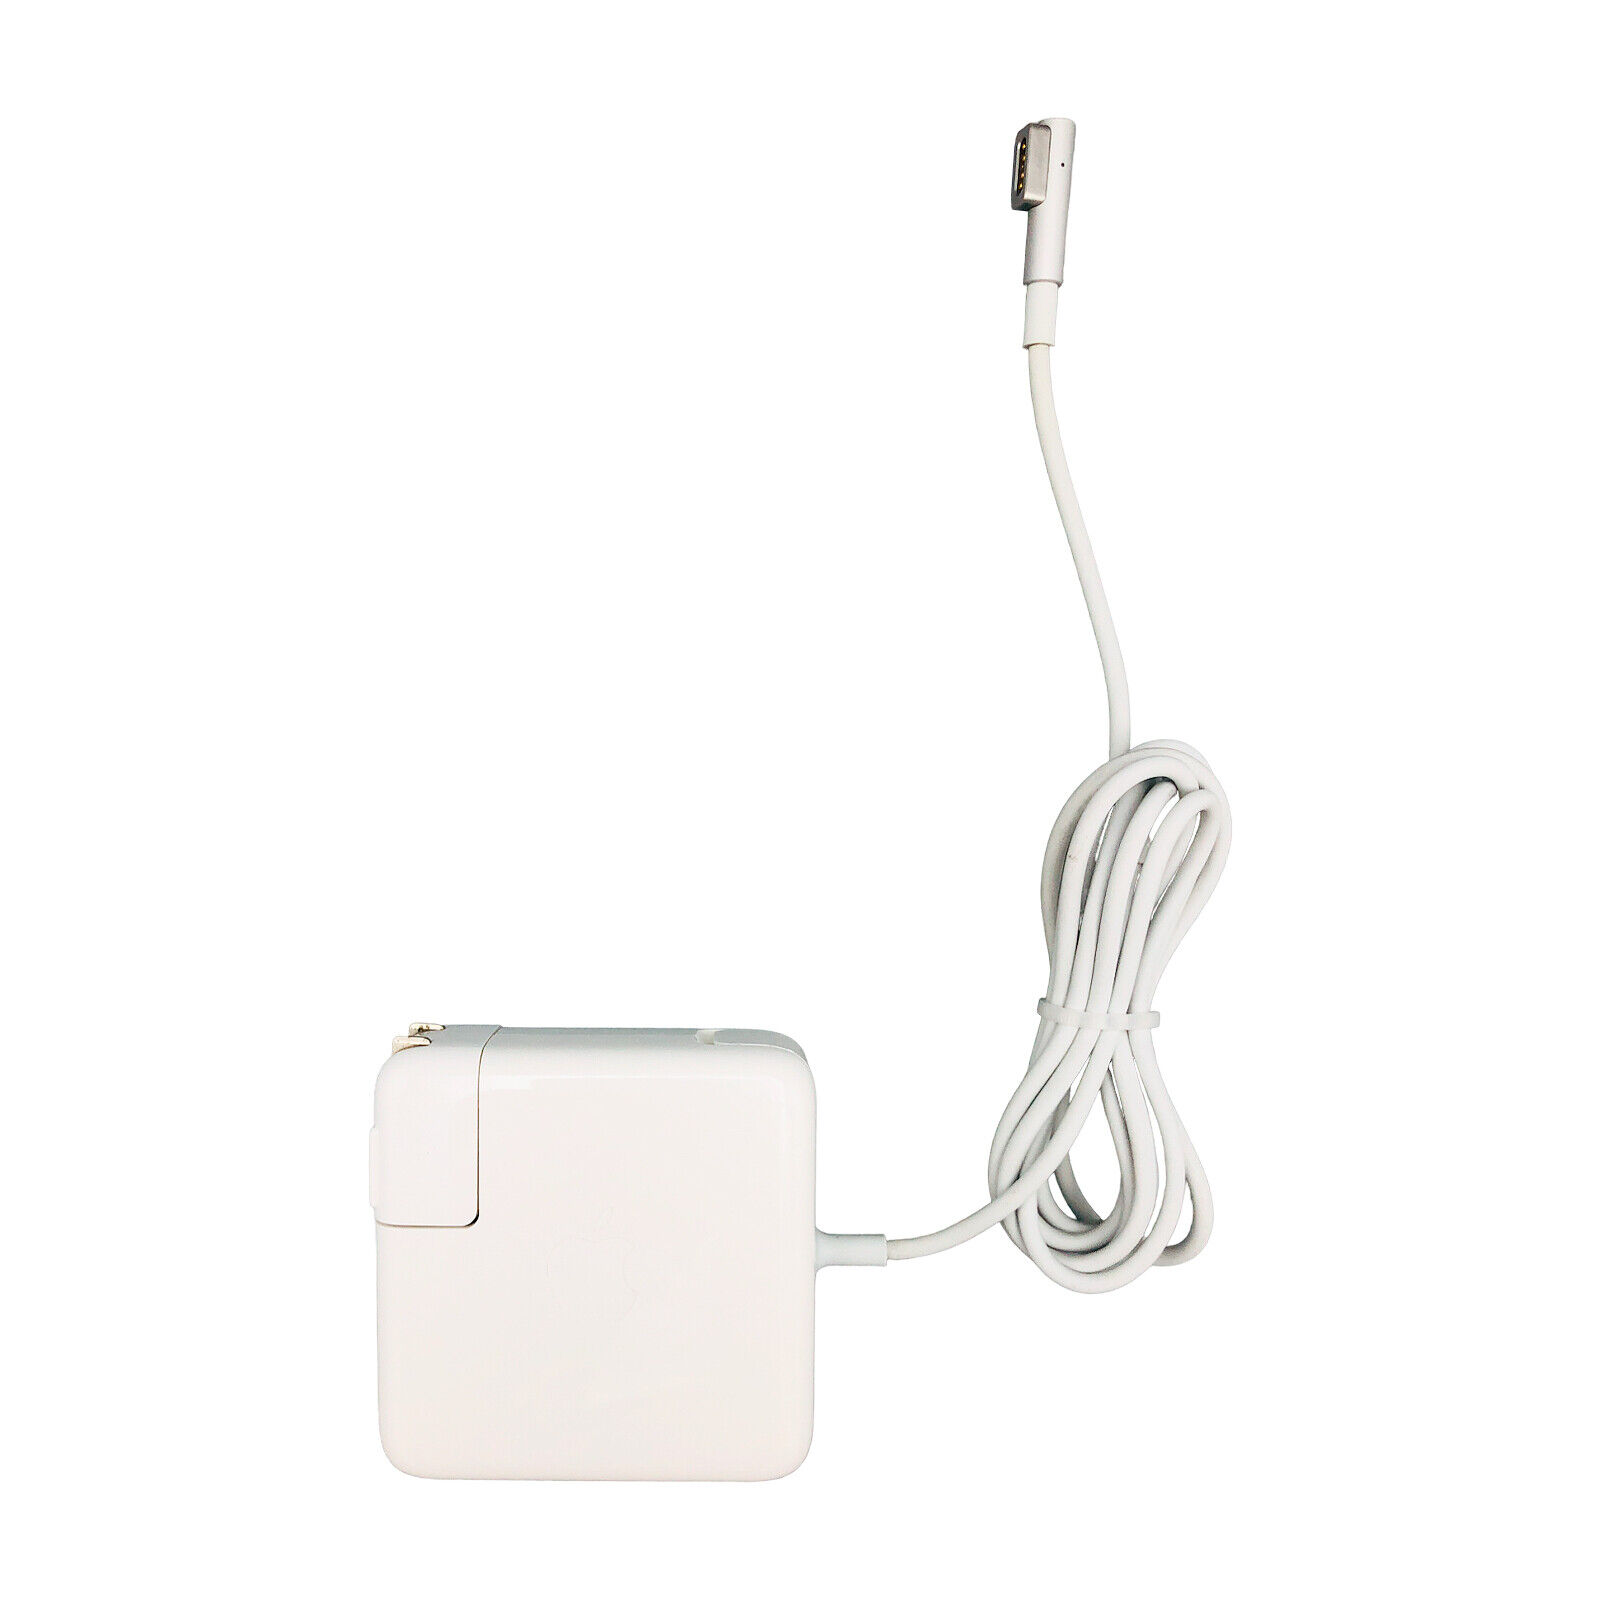 Open Box Genuine Apple MagSafe Power Adapter For MacBook A1181 A1278 A1342 w/PC